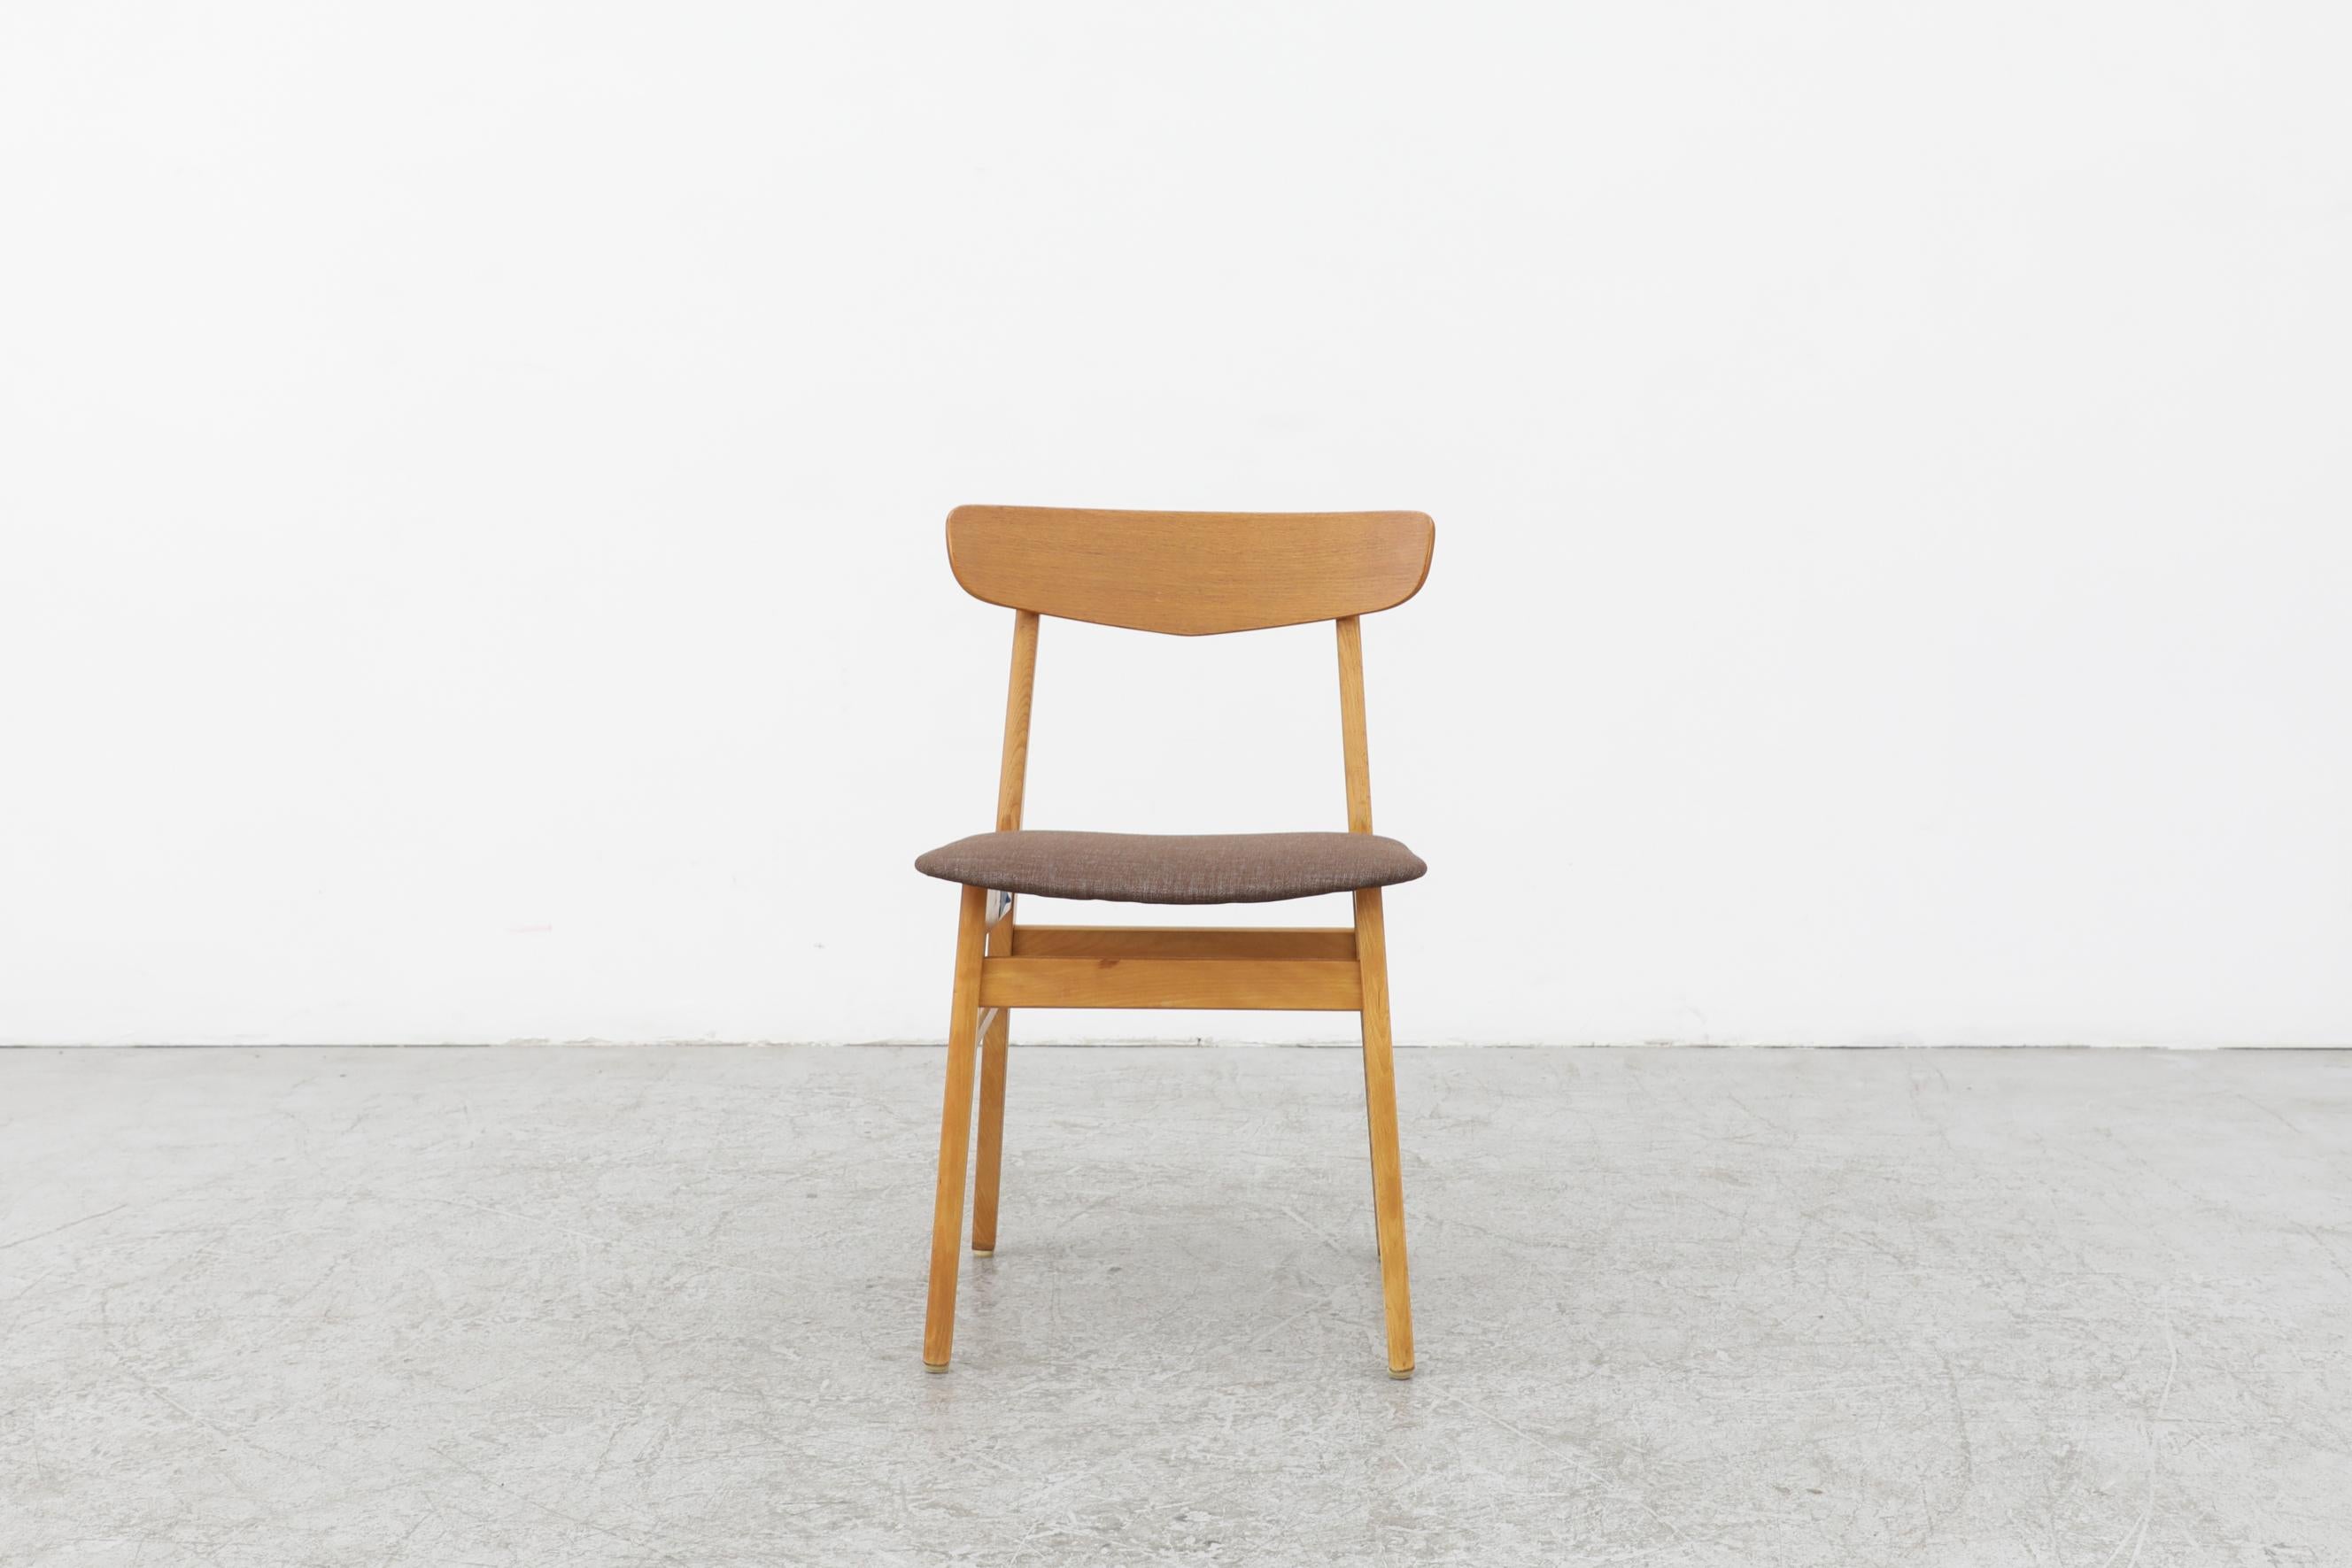 Borge Mogensen inspired dining chair by Farstrup with a blonde wood frame and retro 60's shaped curved teak back. The seat seems to be floating seats. The upholstery may have been changed by previous owner. In otherwise original condition with some